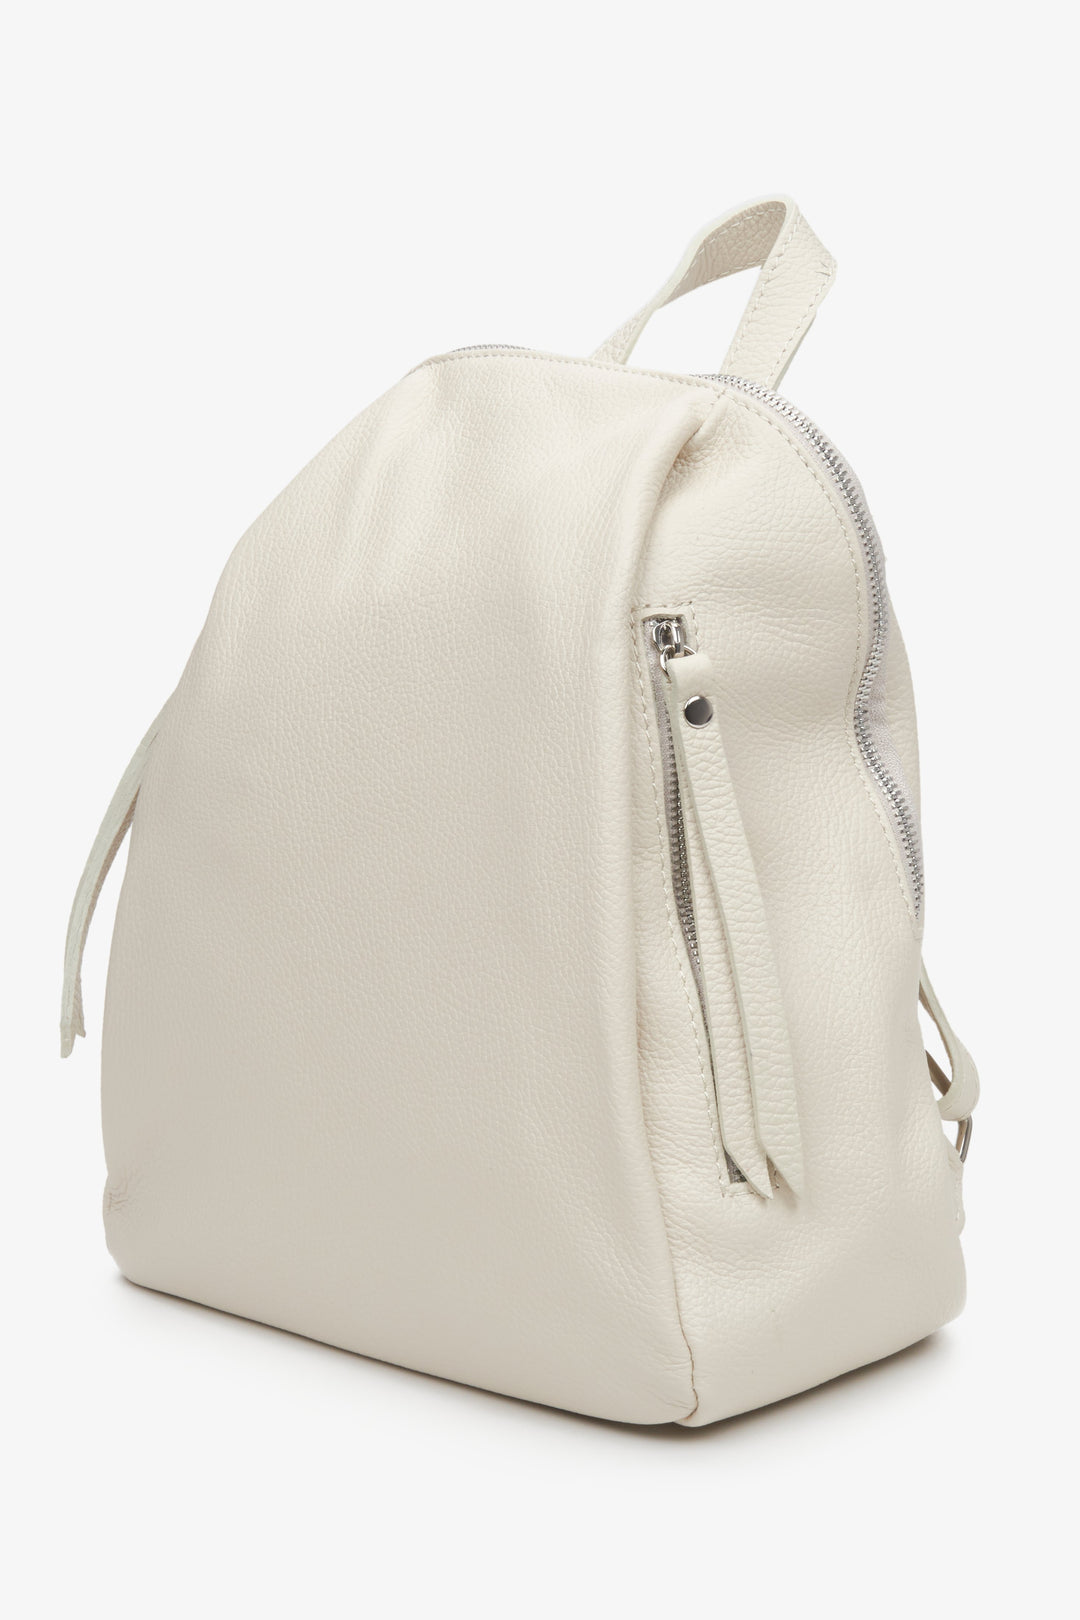 Women's Light Beige Leather Backpack with silver accents Estro ER00113410.